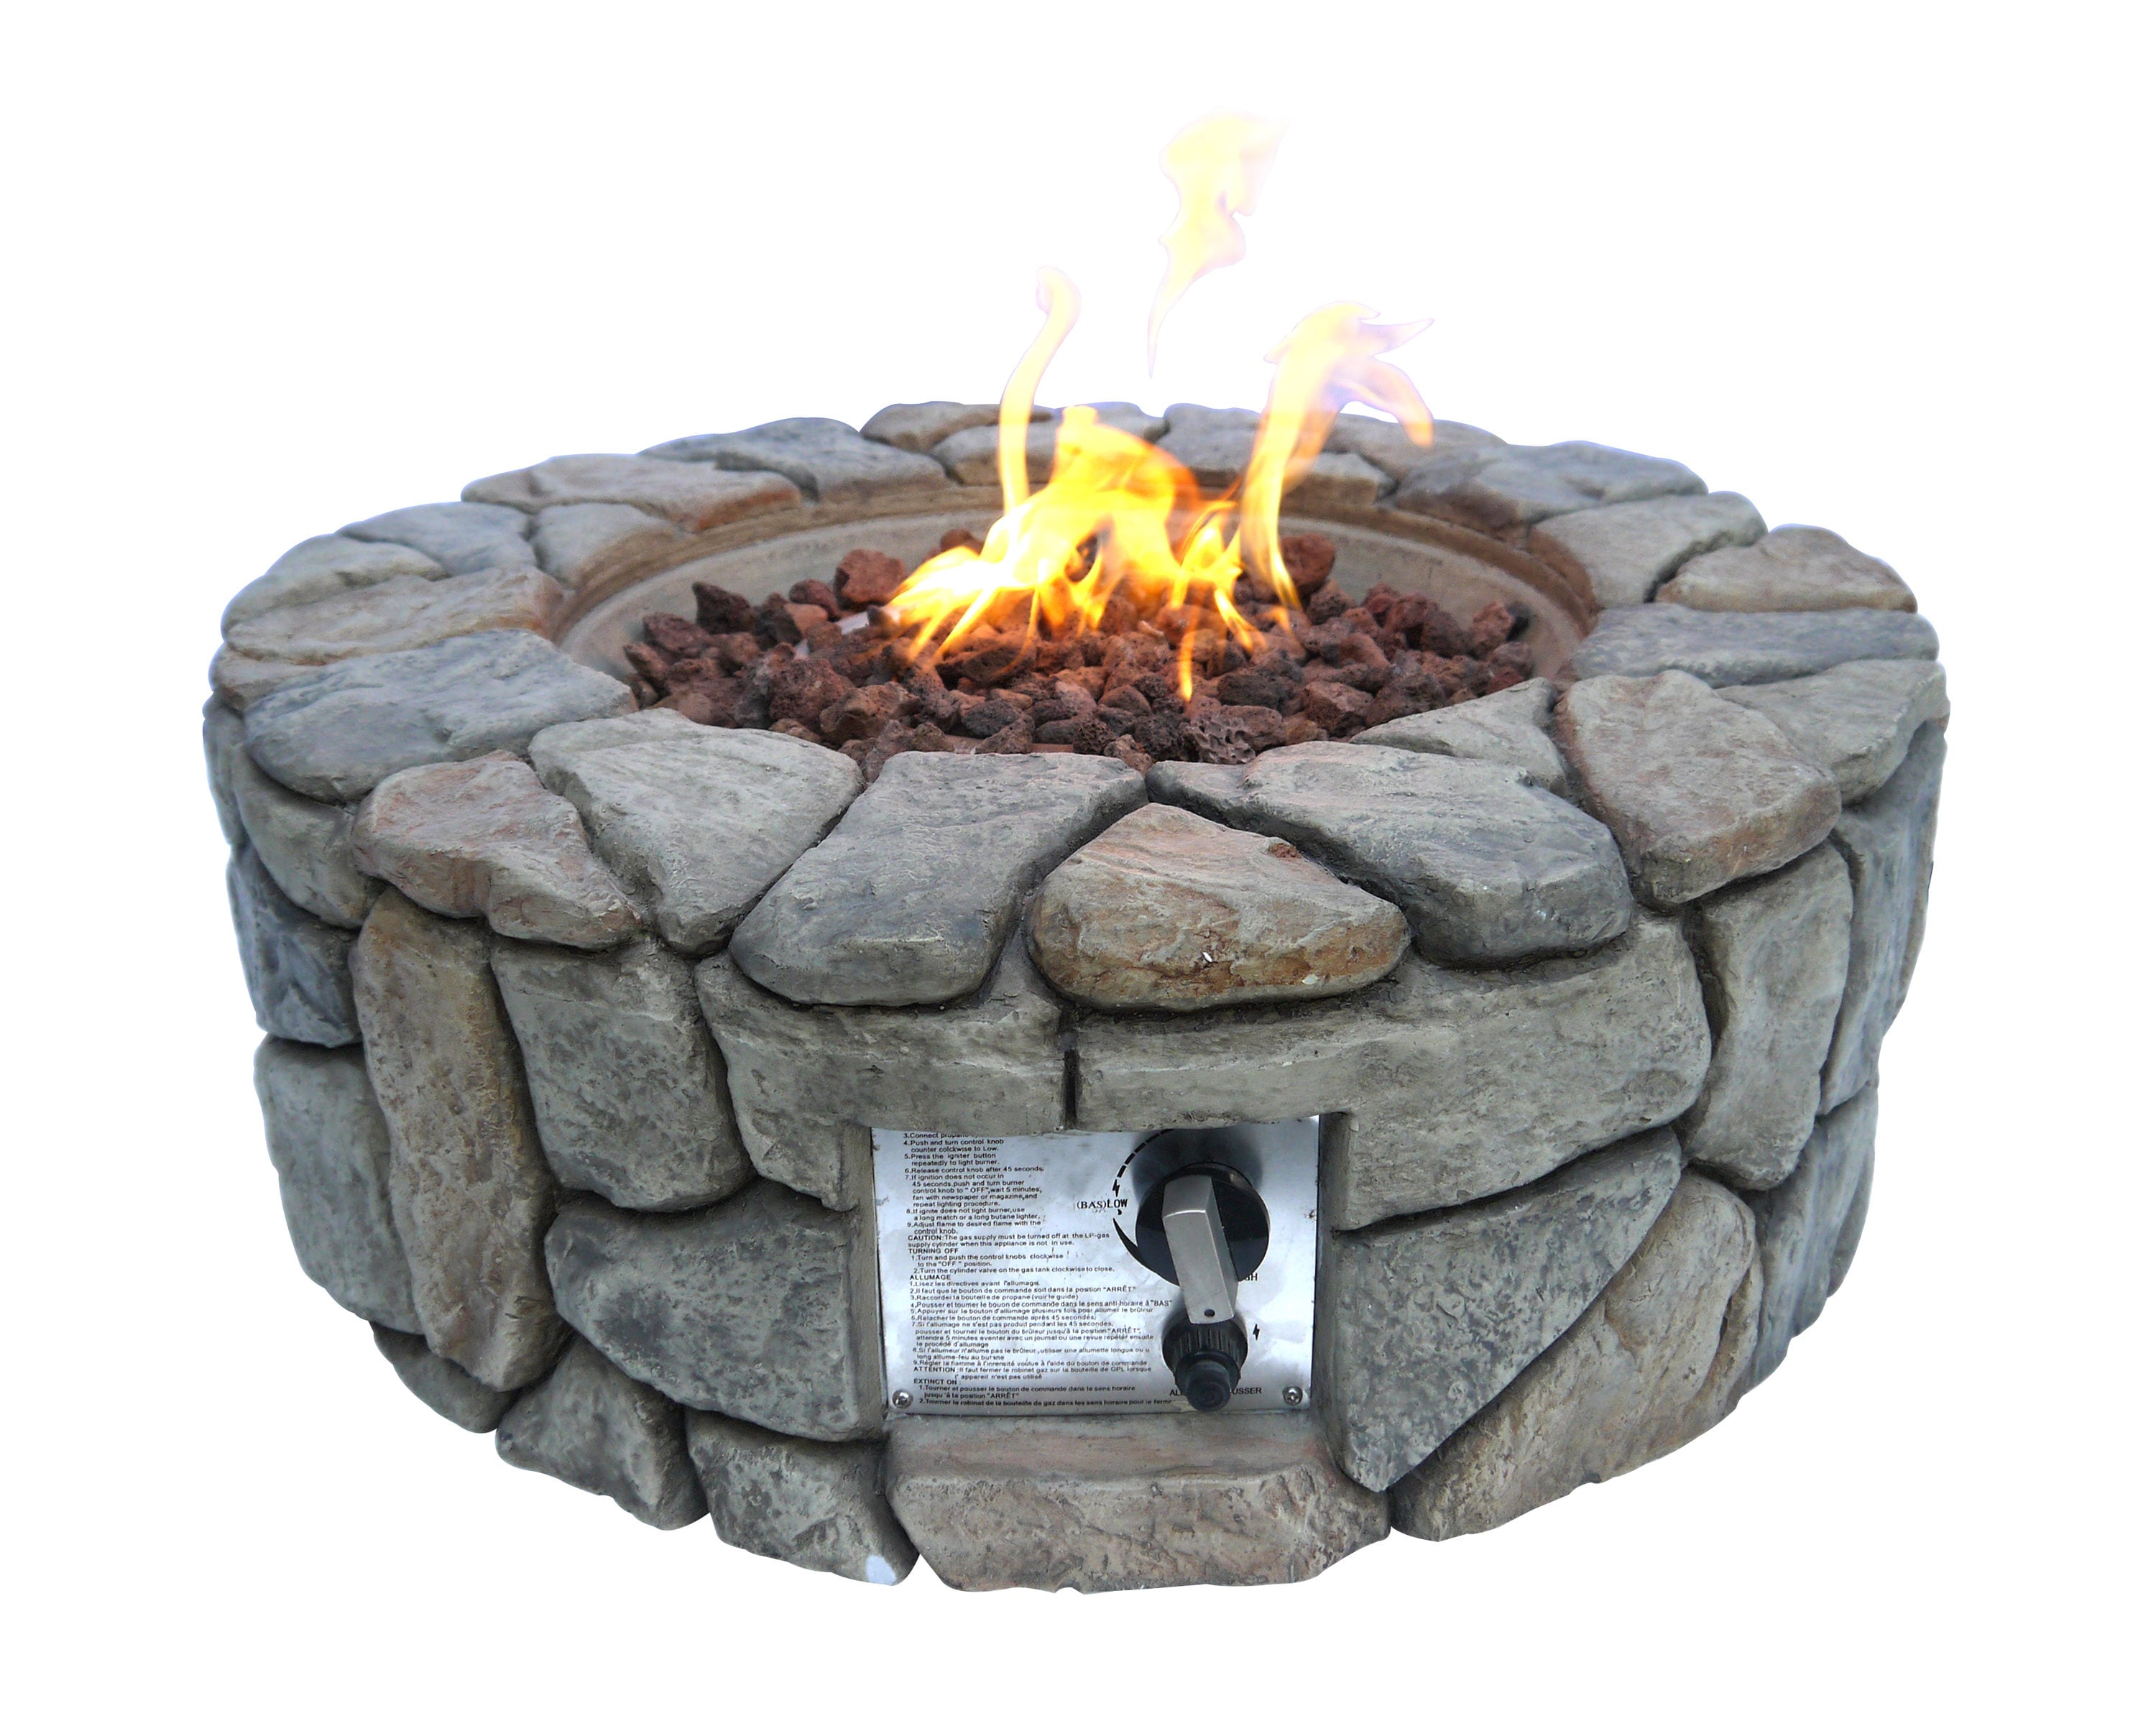 Concrete Propane Gas Fire Pit, How To Build A Propane Gas Fire Pit